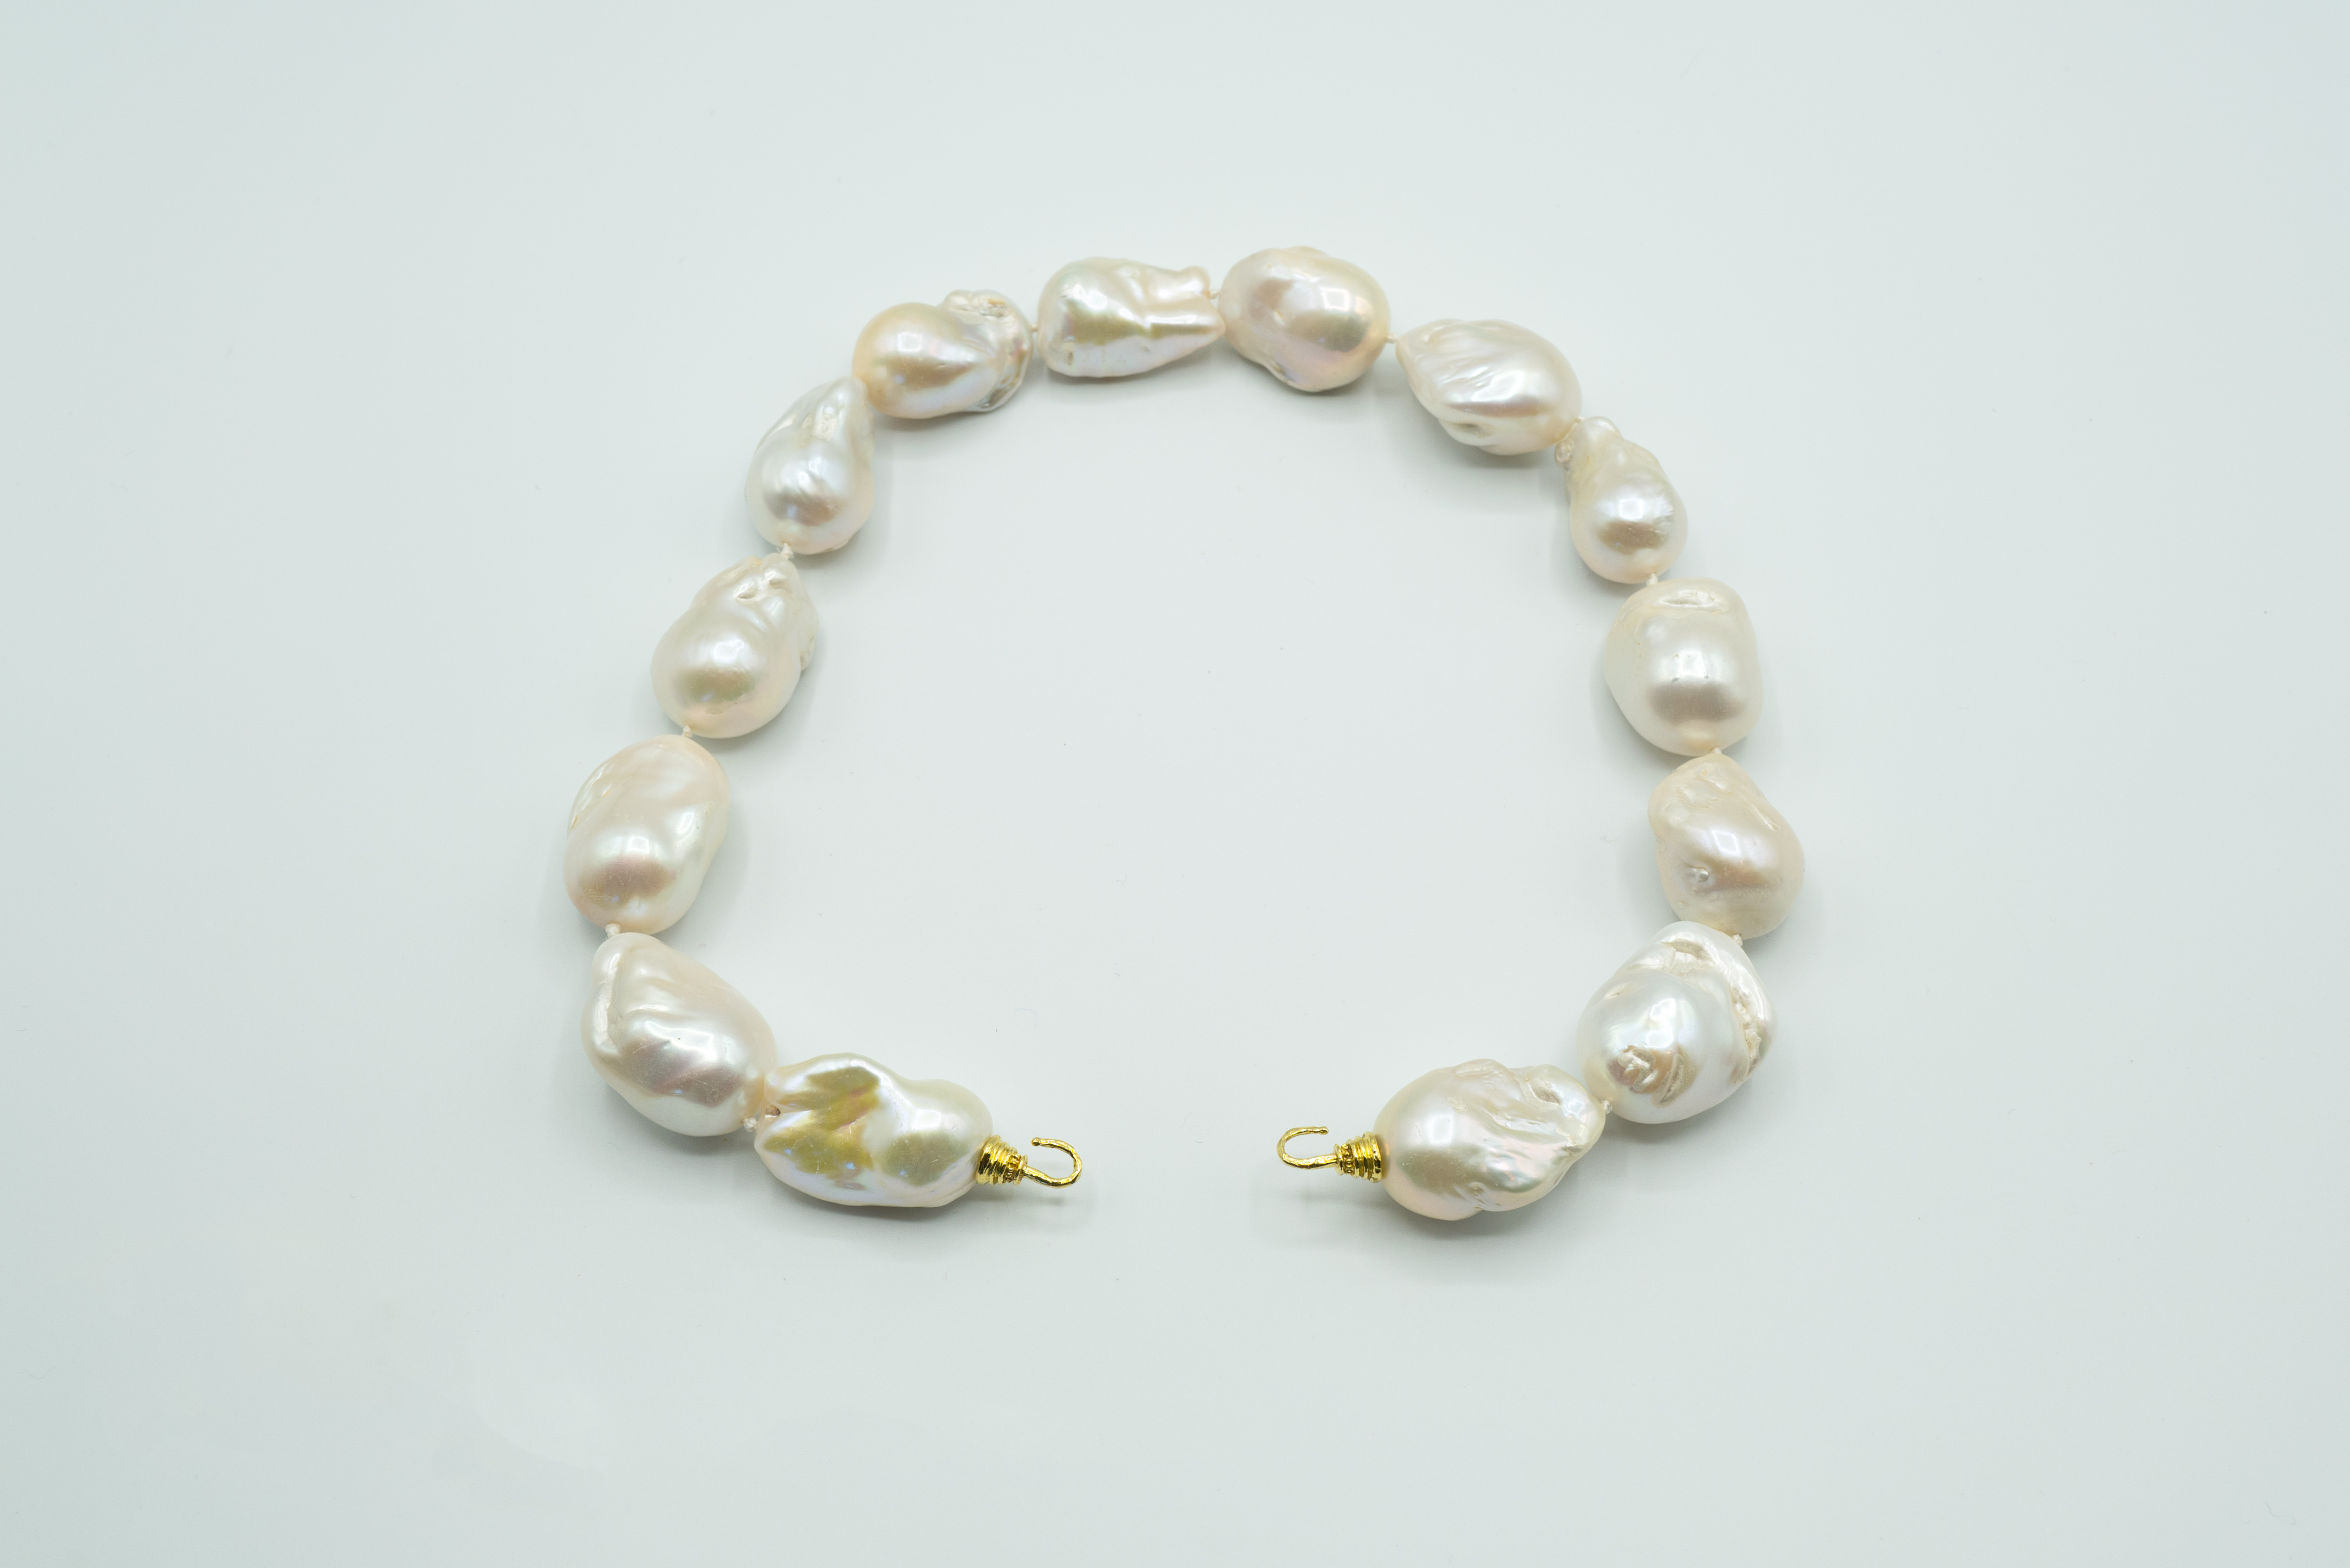 Jumbo Freshwater Baroque Pearls, Smooth Texture, Hand Knotted on Hand Cast Brass Hooks, Unusual and Rare Pearls